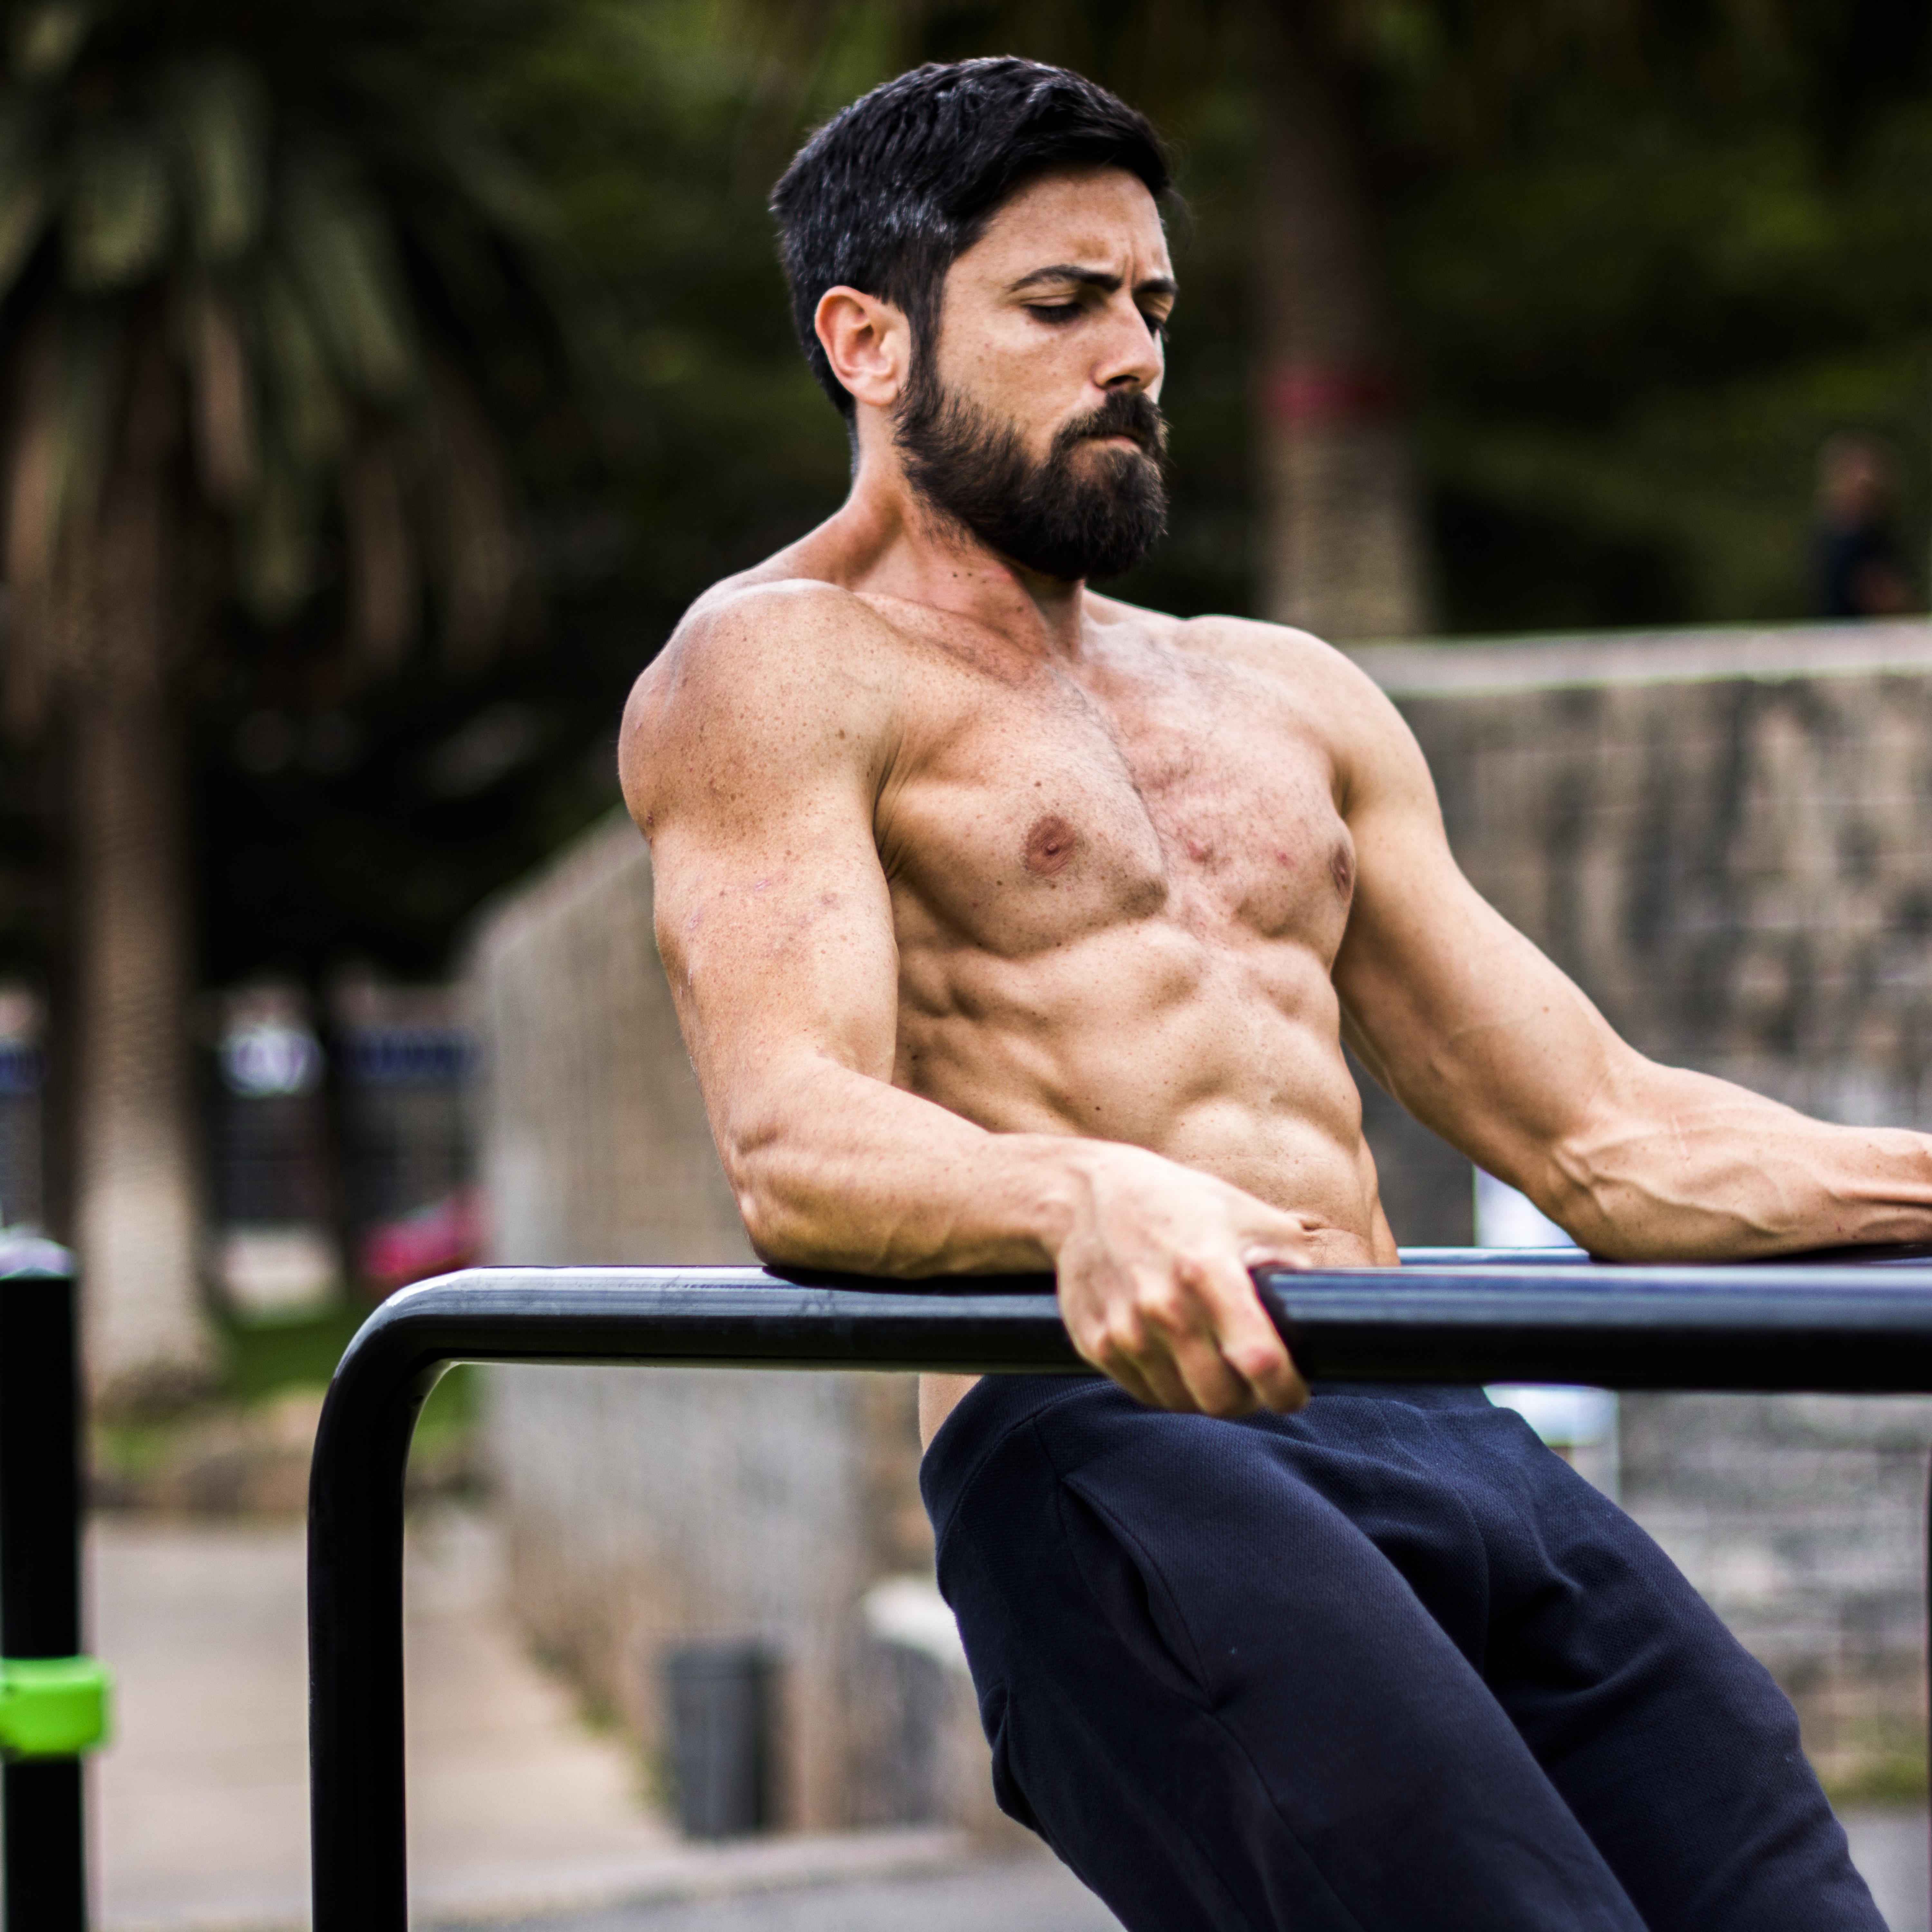 What is Calisthenics or Street Workout?